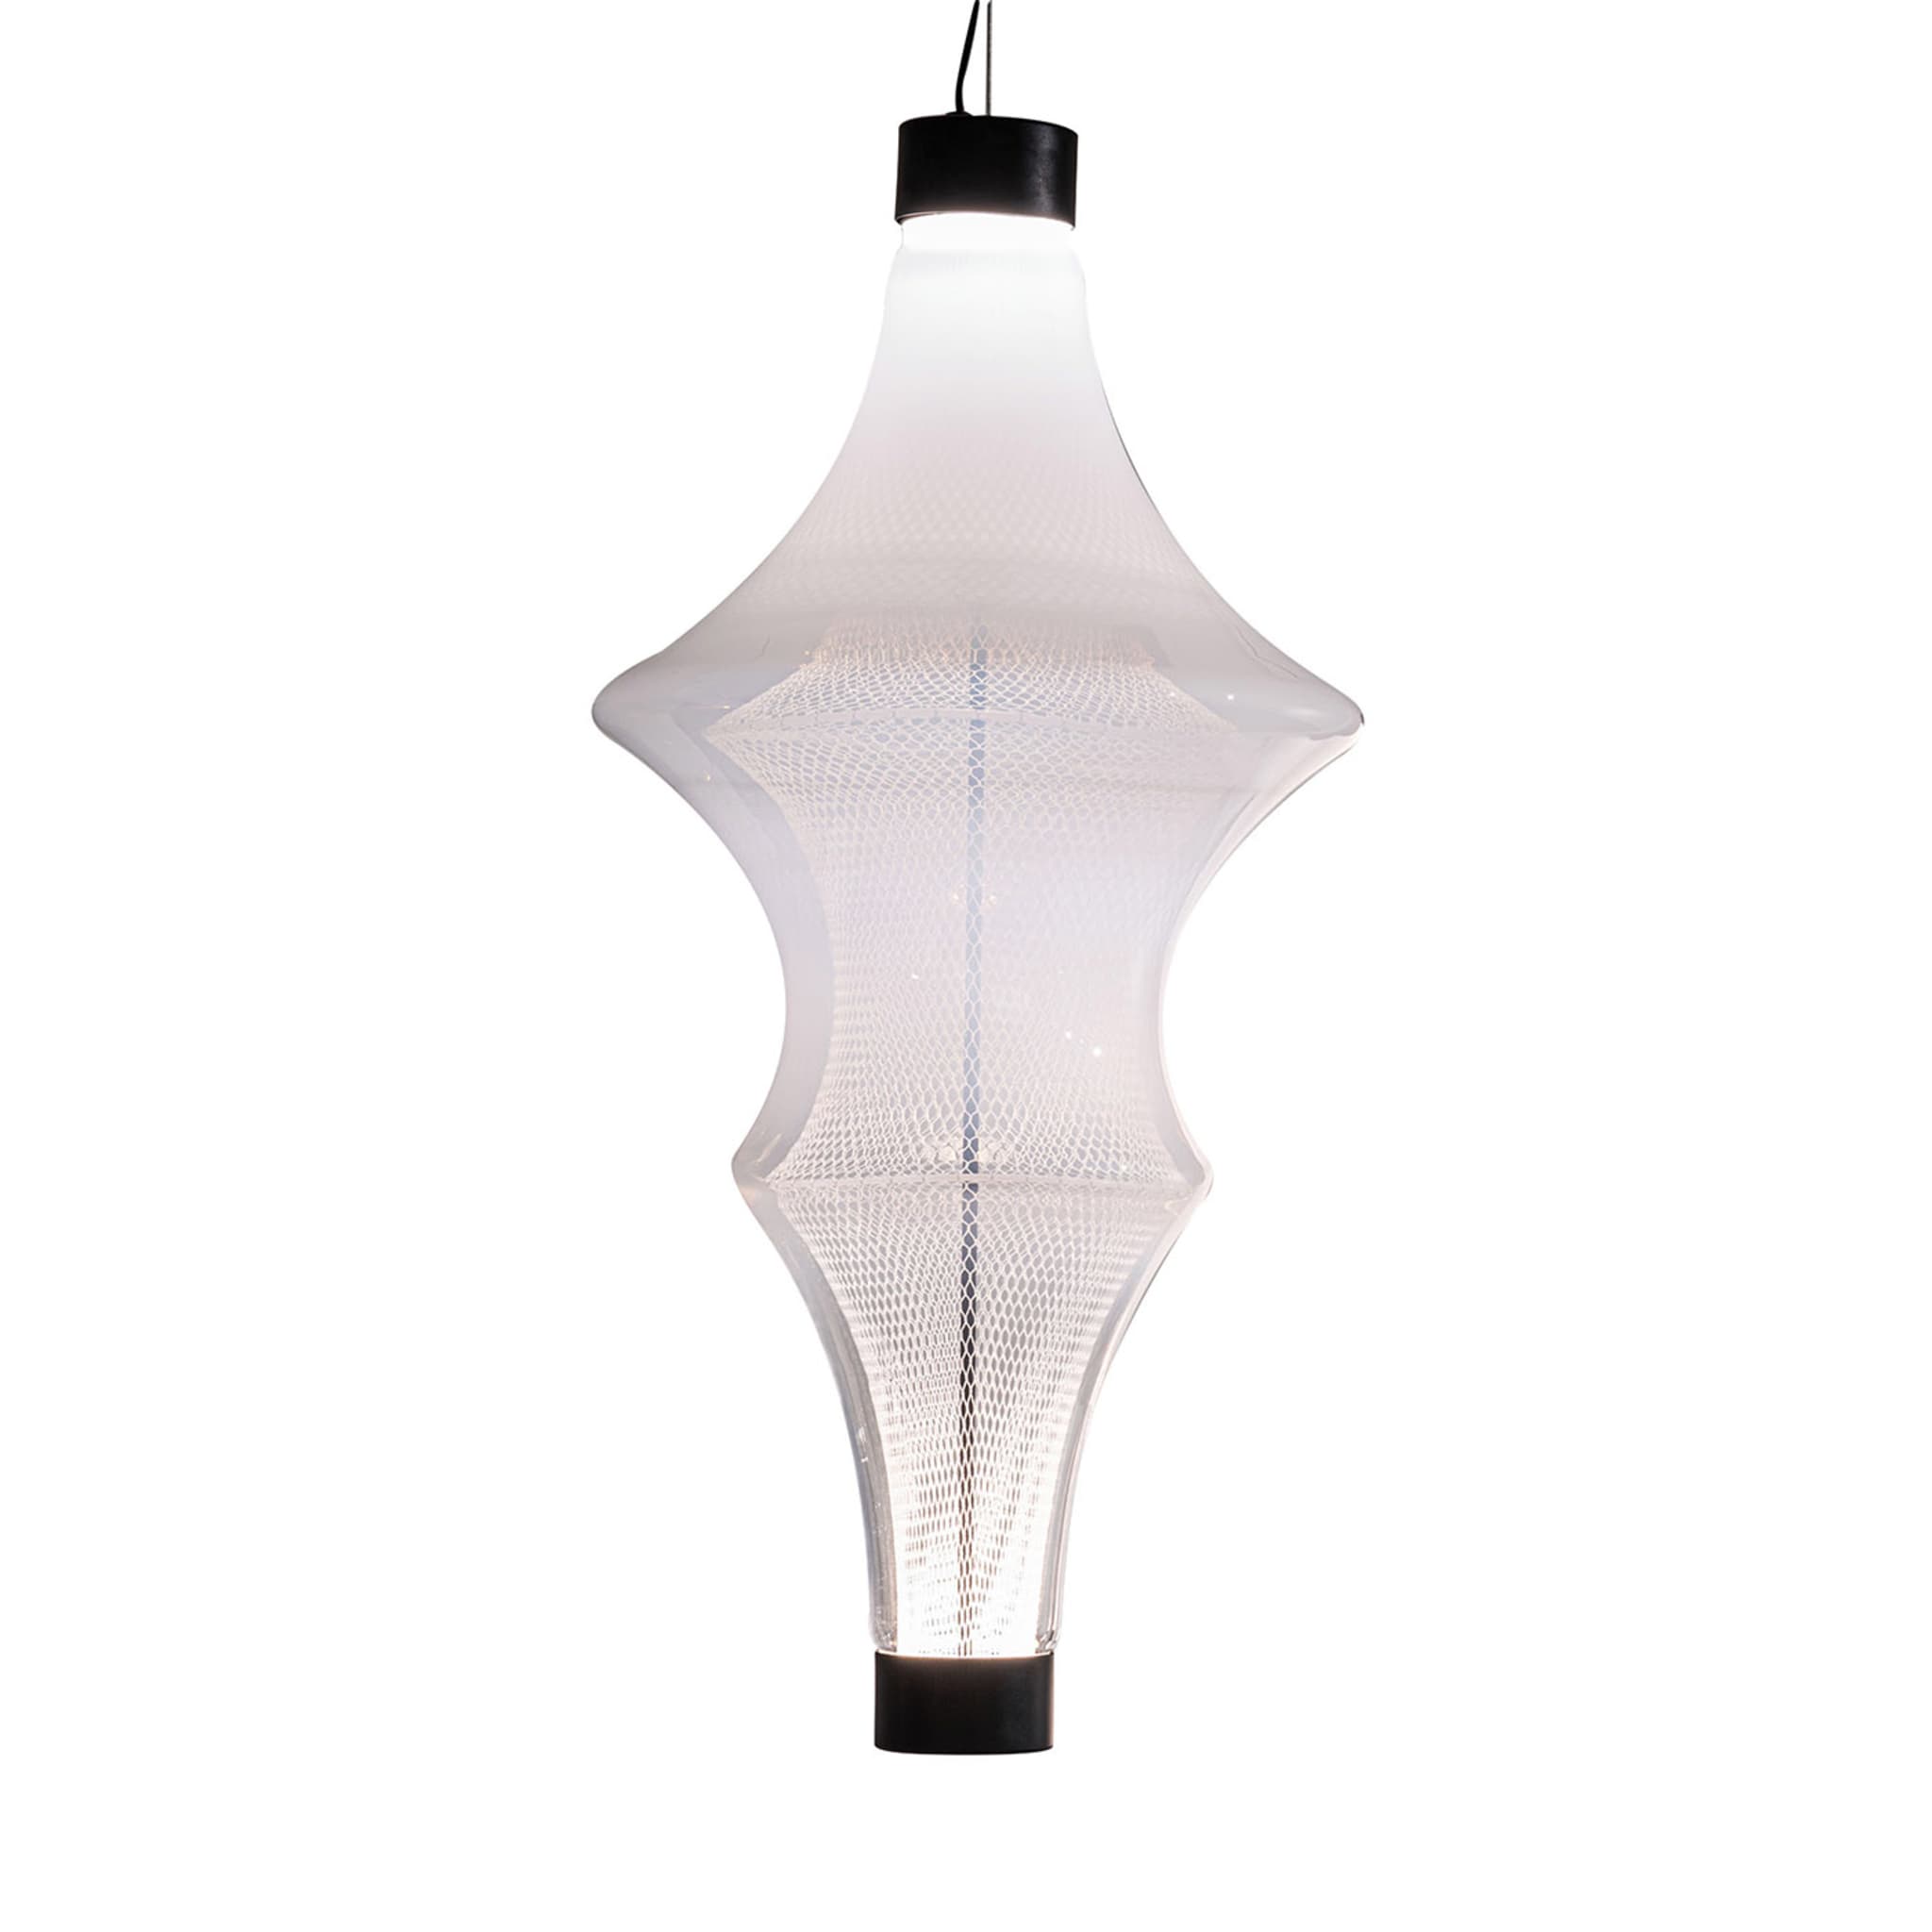 Nasse 02 Pendant Lamp by Marco Zito - Main view